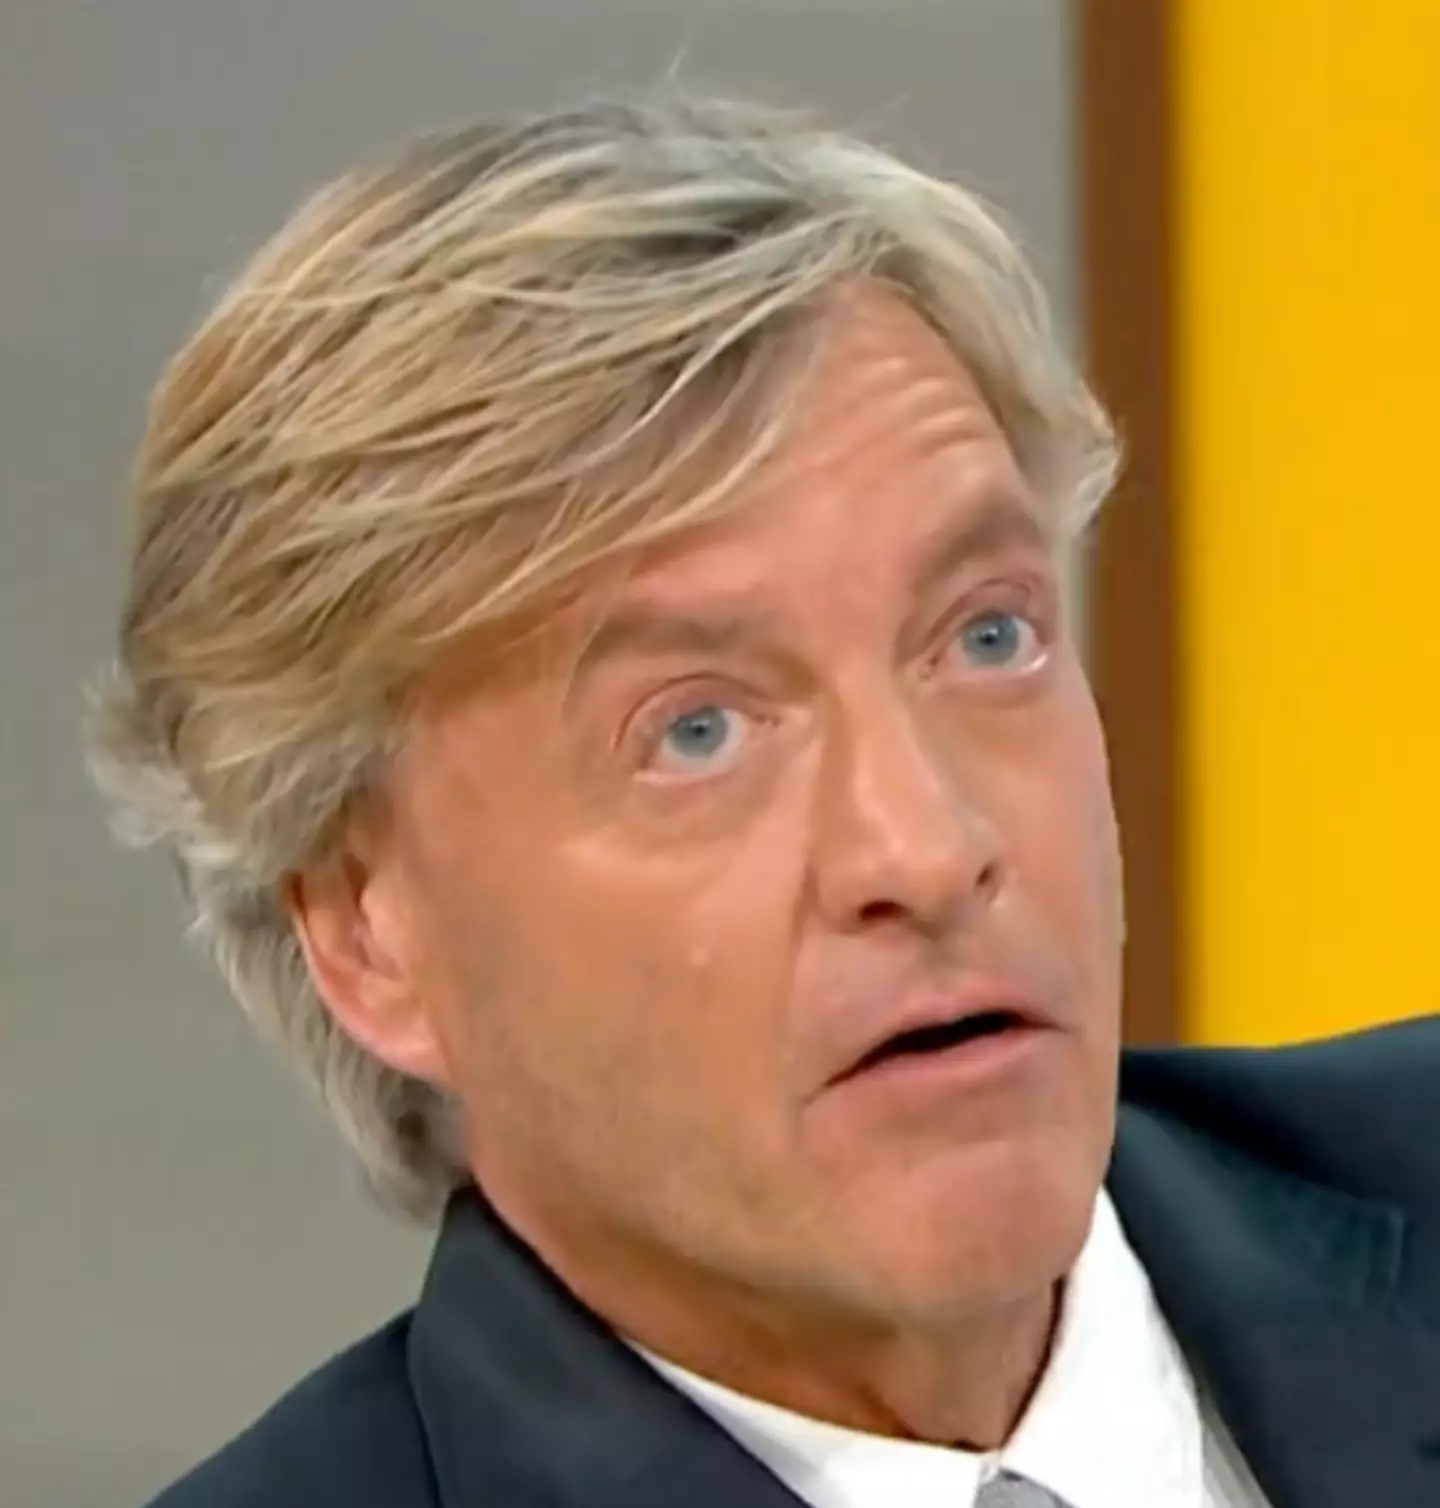 Richard Madeley was evidently shocked to discover he featured in the doc.